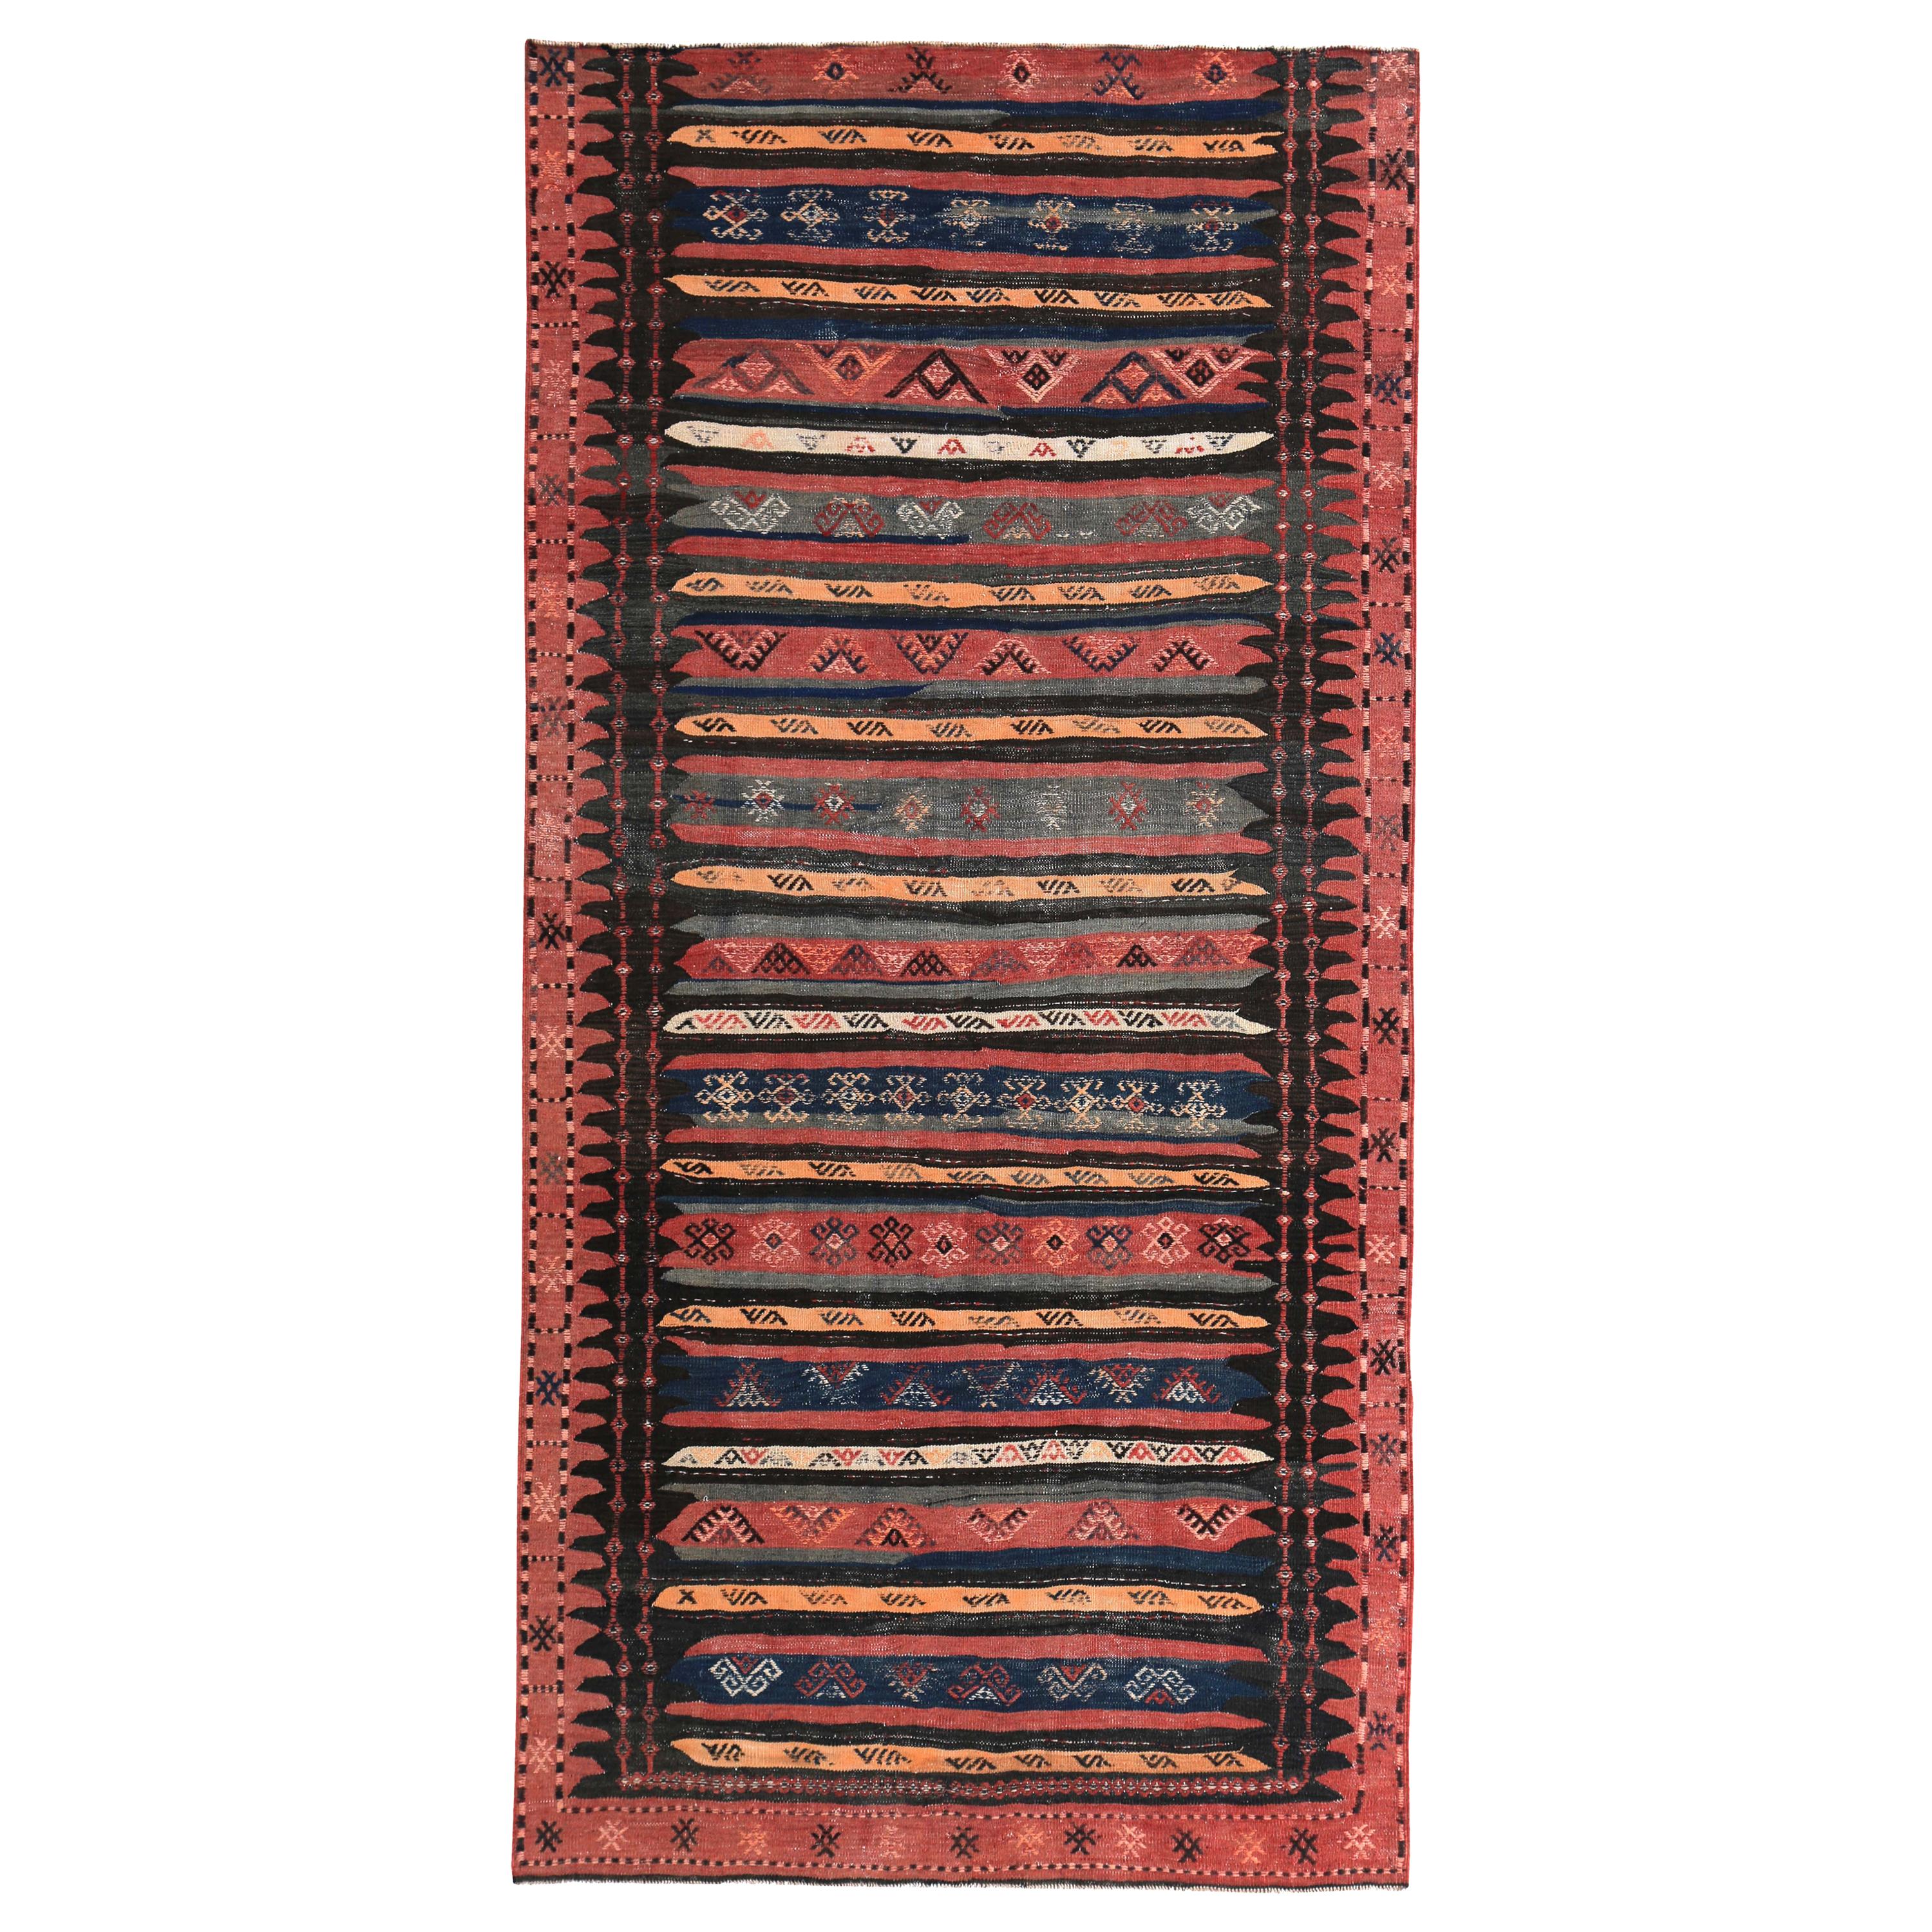 Modern Turkish Kilim Runner Rug with Red, Orange and Brown Tribal Stripes For Sale